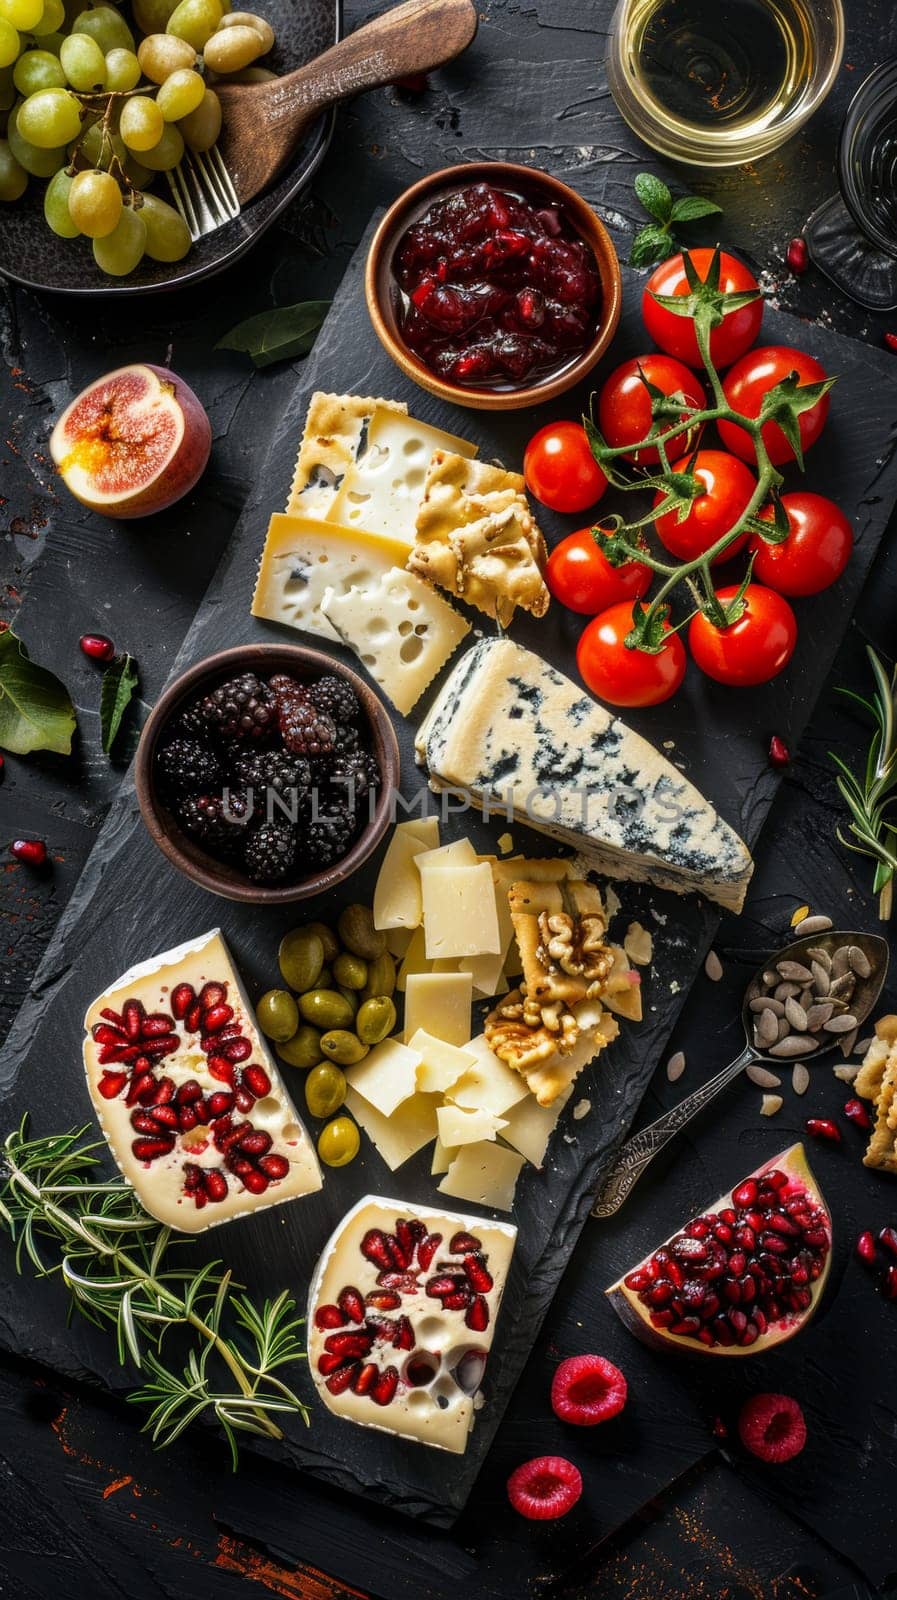 A table with cheese, fruit and nuts on it next to a glass of wine